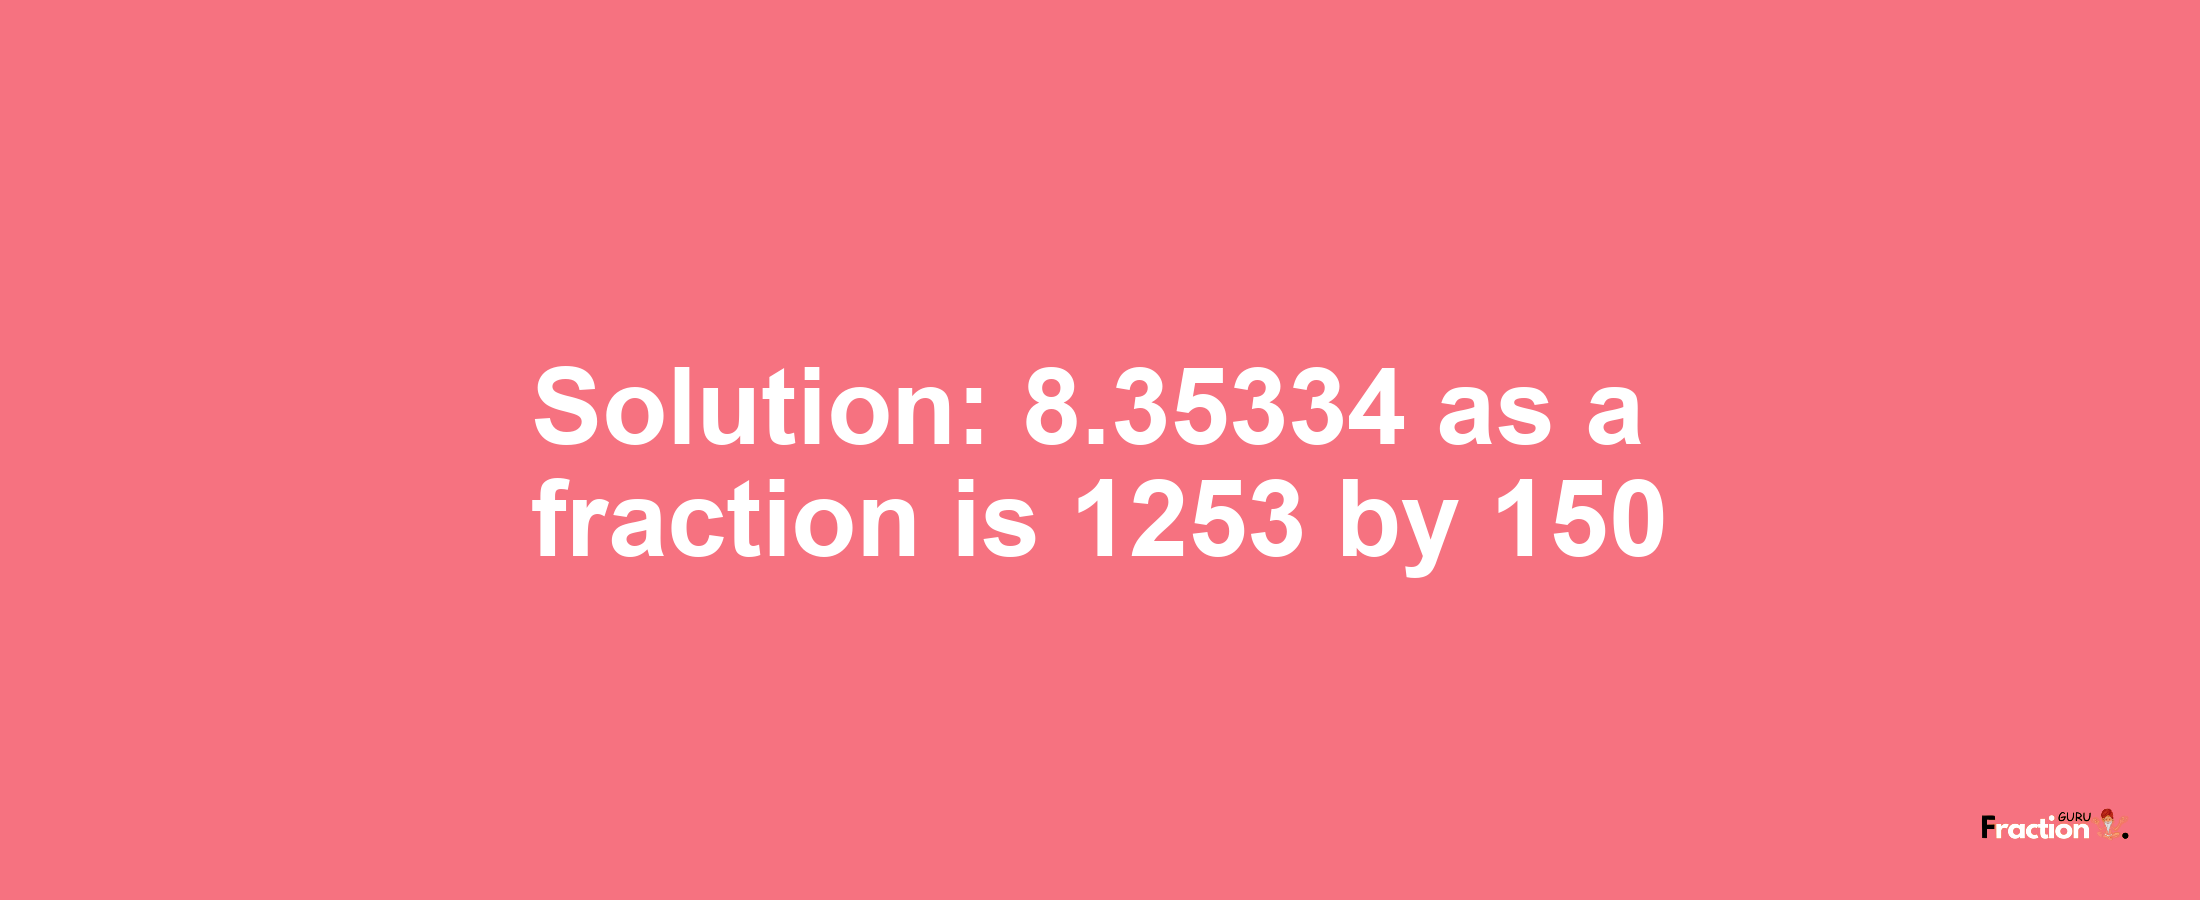 Solution:8.35334 as a fraction is 1253/150